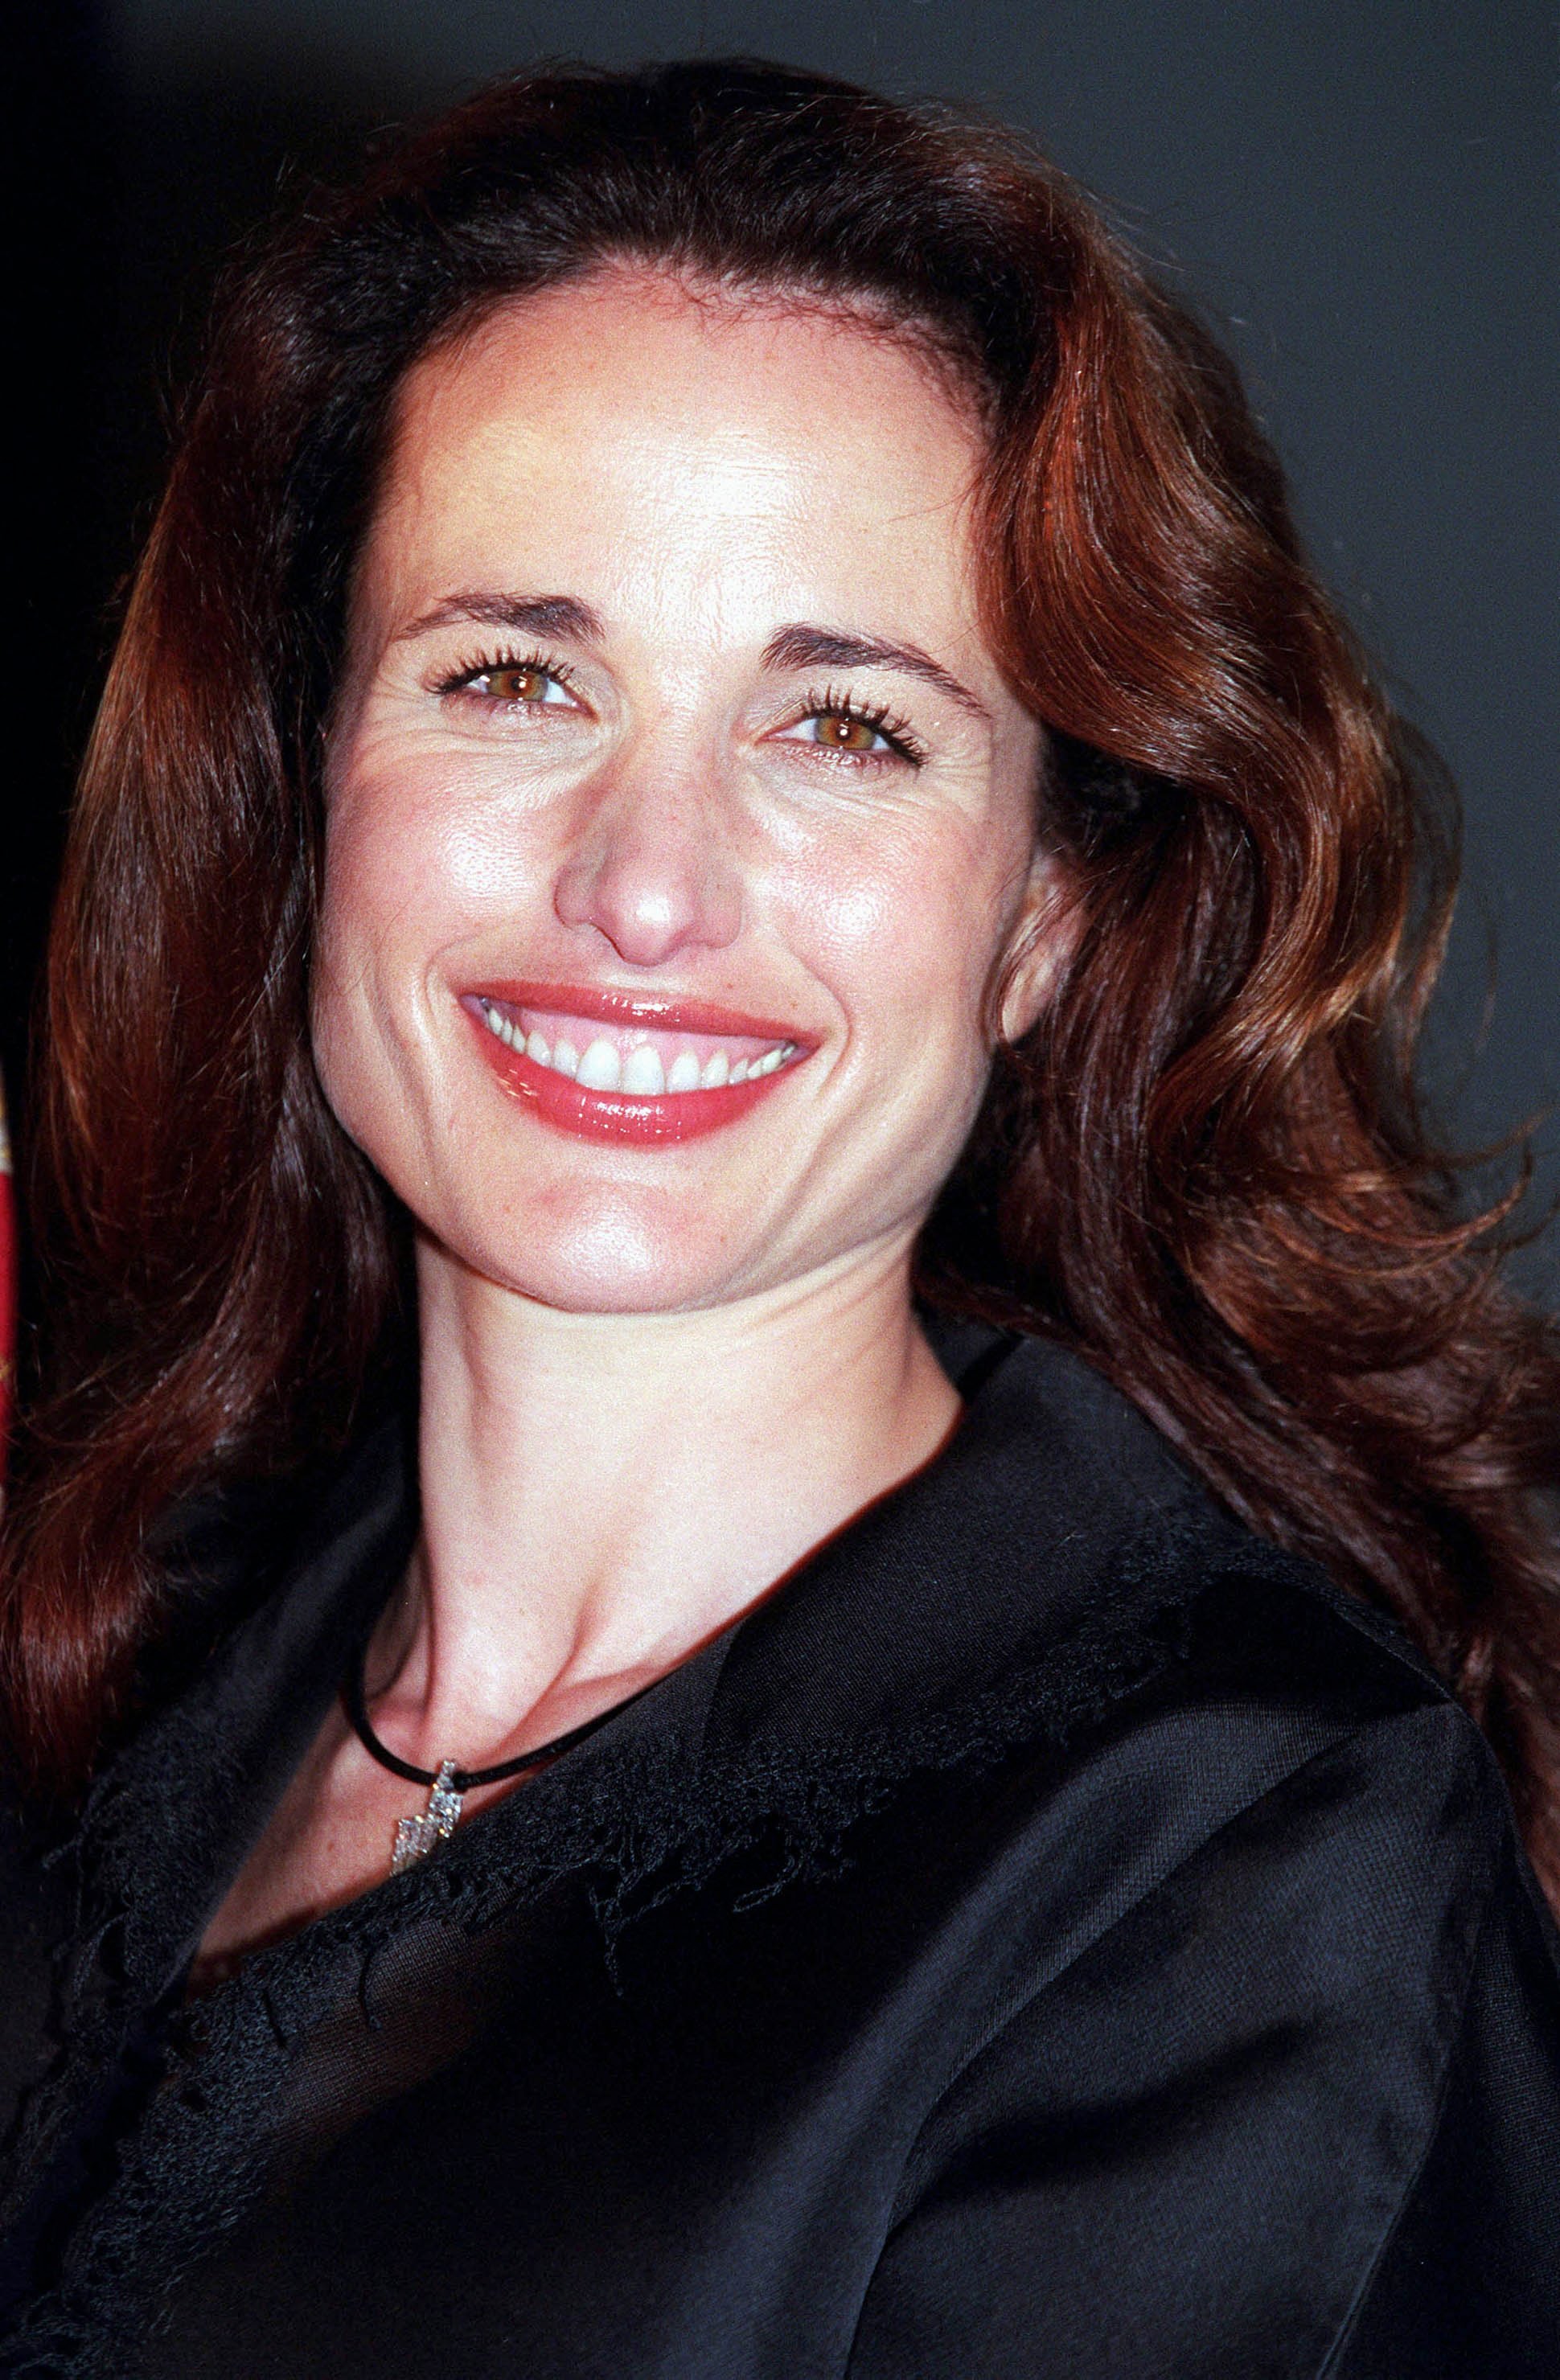 Andie MacDowell In Cannes, France on May 12, 2000 | Source: Getty Images